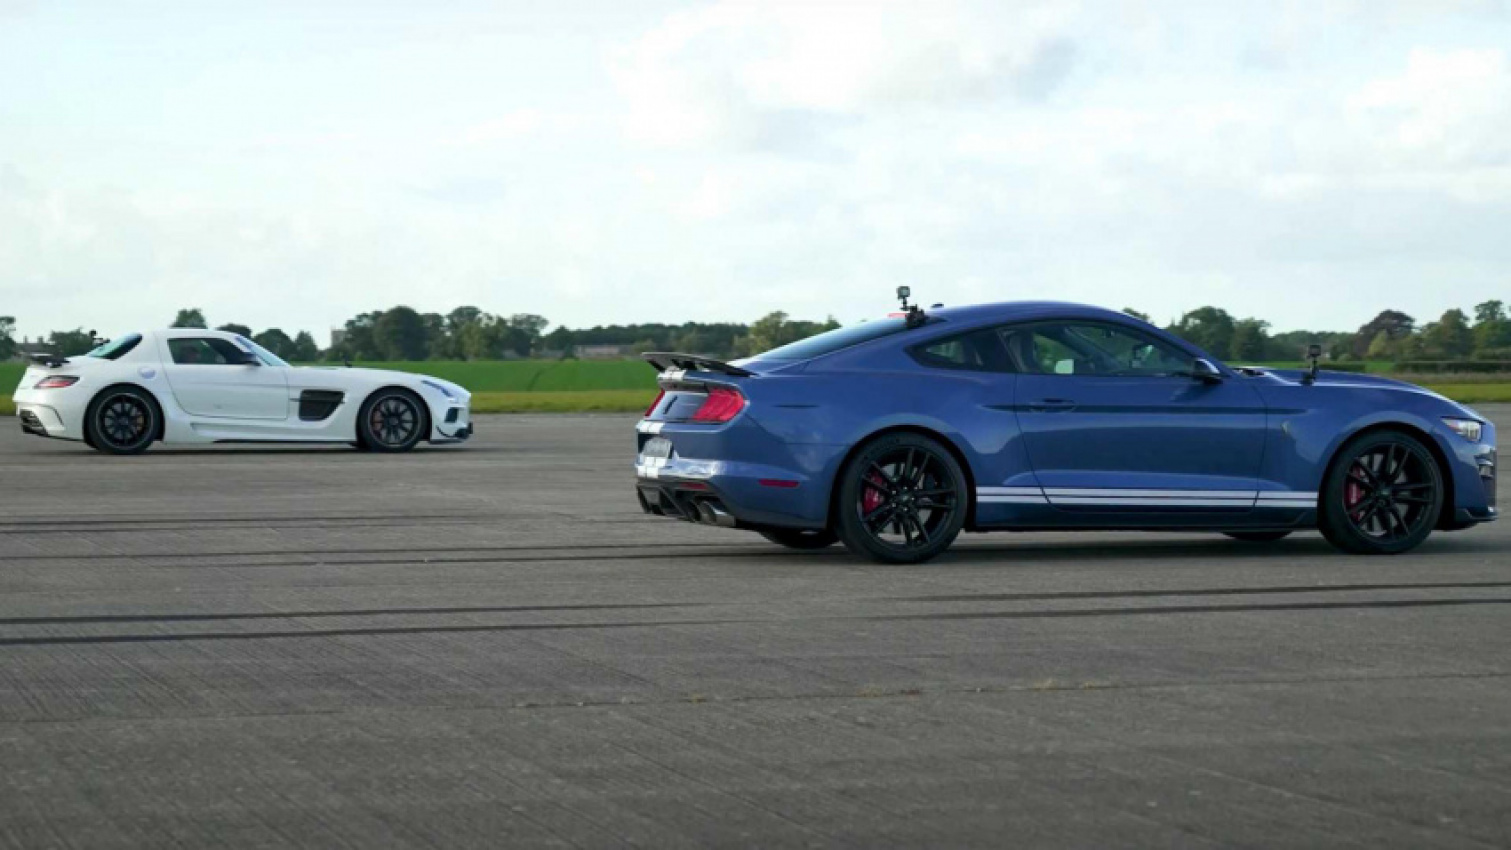 autos, cars, mg, shelby, can a shelby gt500 beat an aging amg sls black series in a drag race?